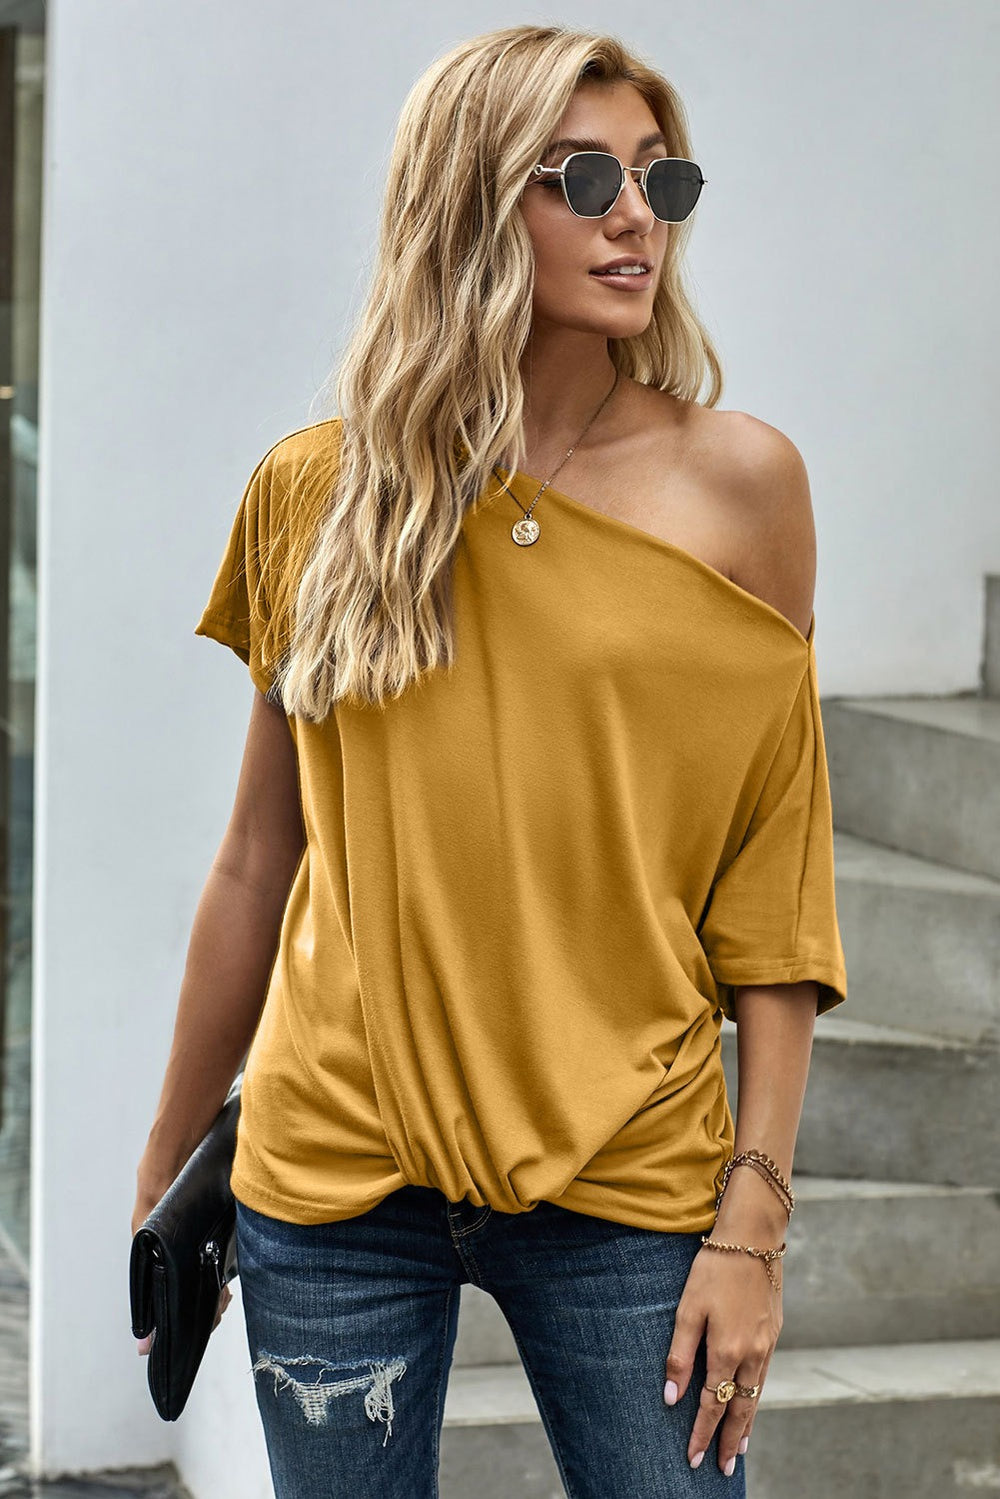 Women's Yellow Off-The-Shoulder Slash Neck Casual Loose Fitting Top